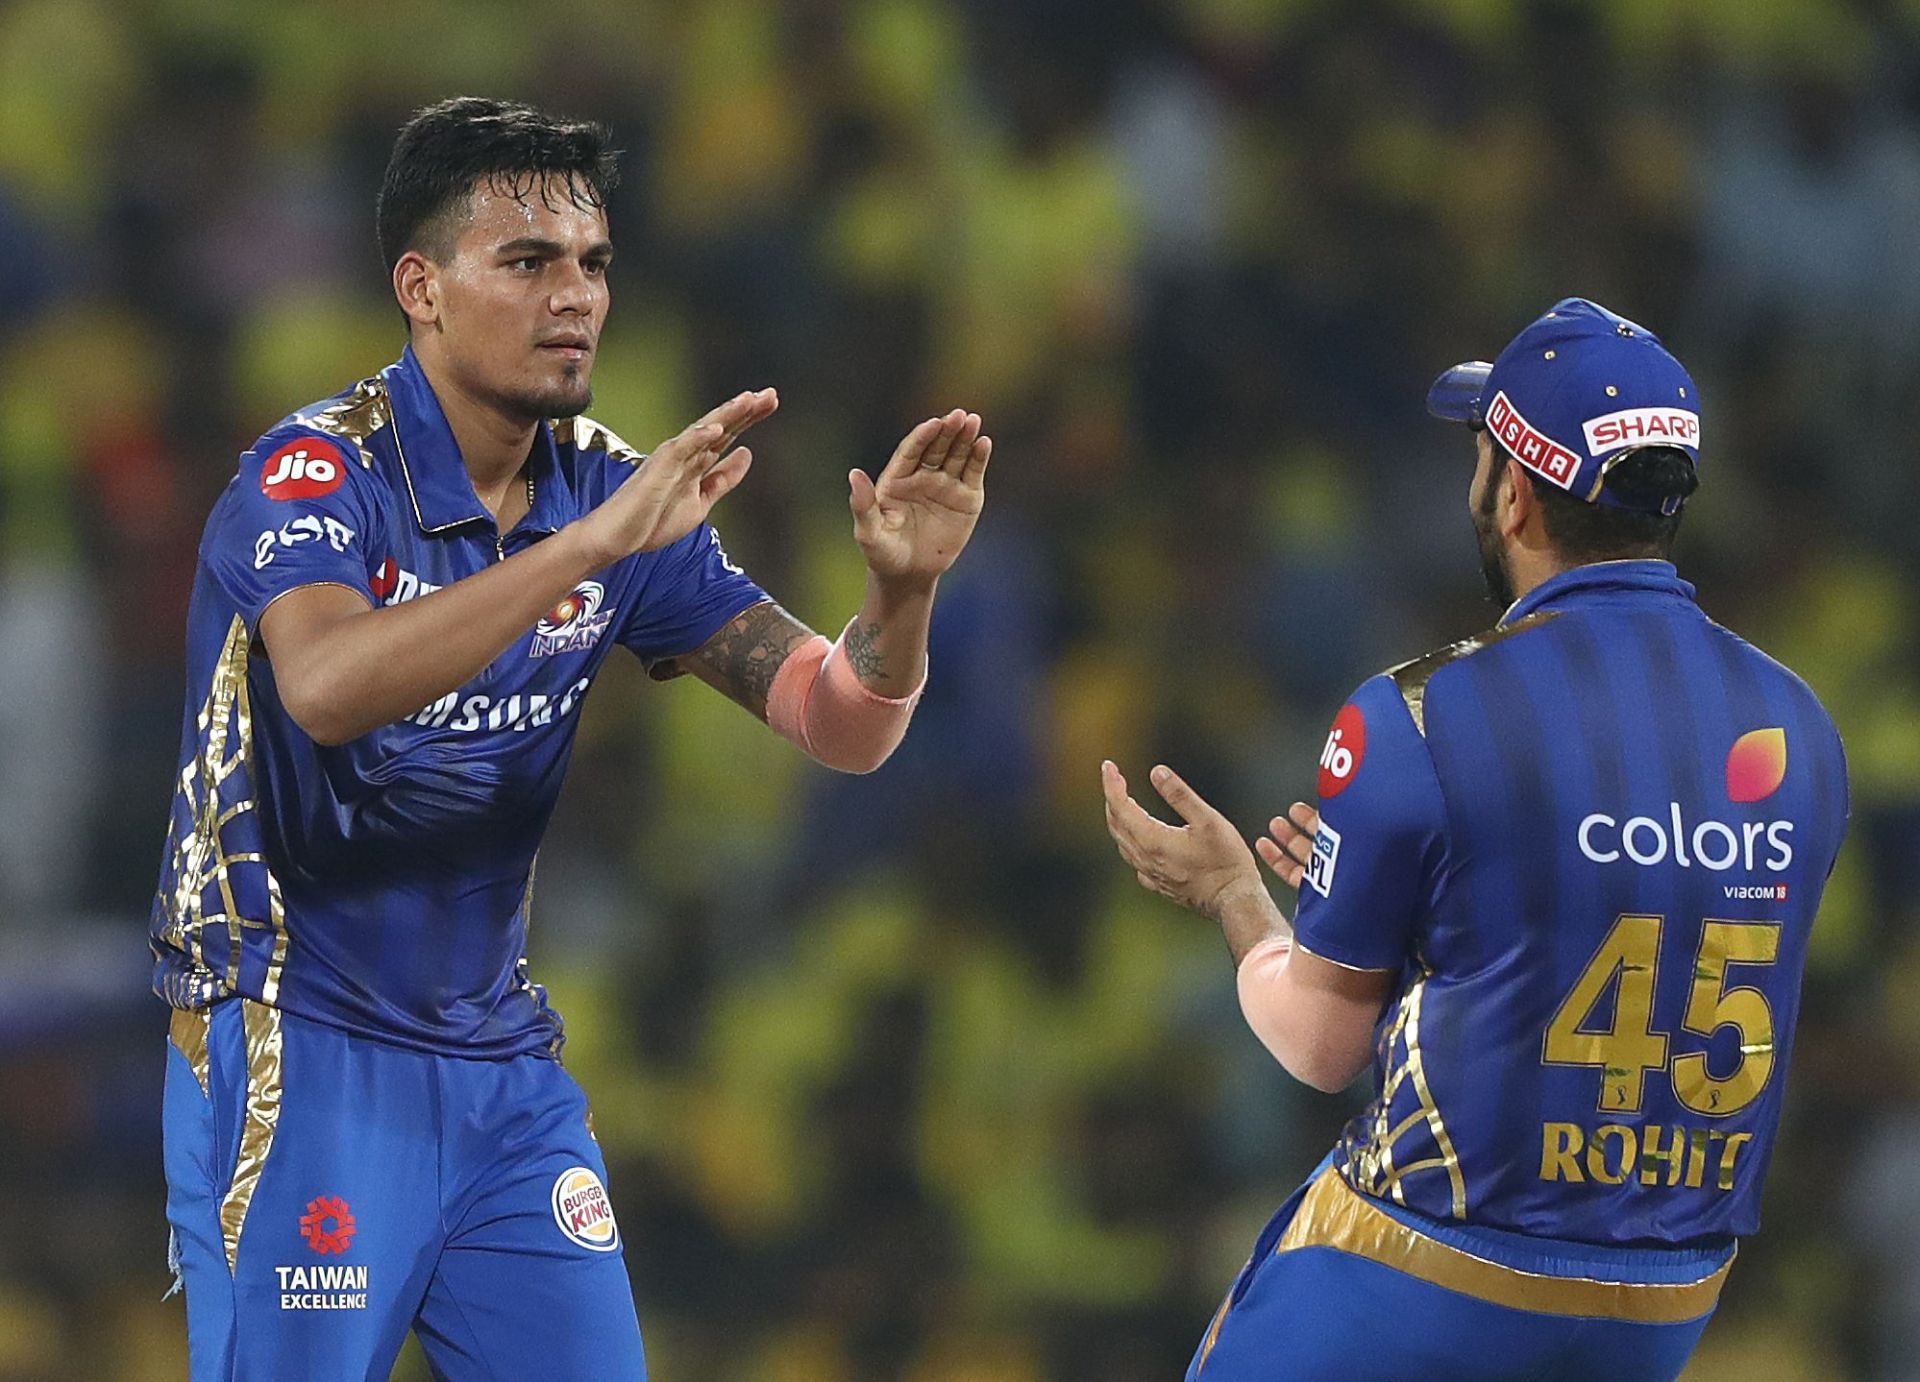 Rahul Chahar was an integral part of the Mumbai Indians team in the IPL. (Image: Getty)